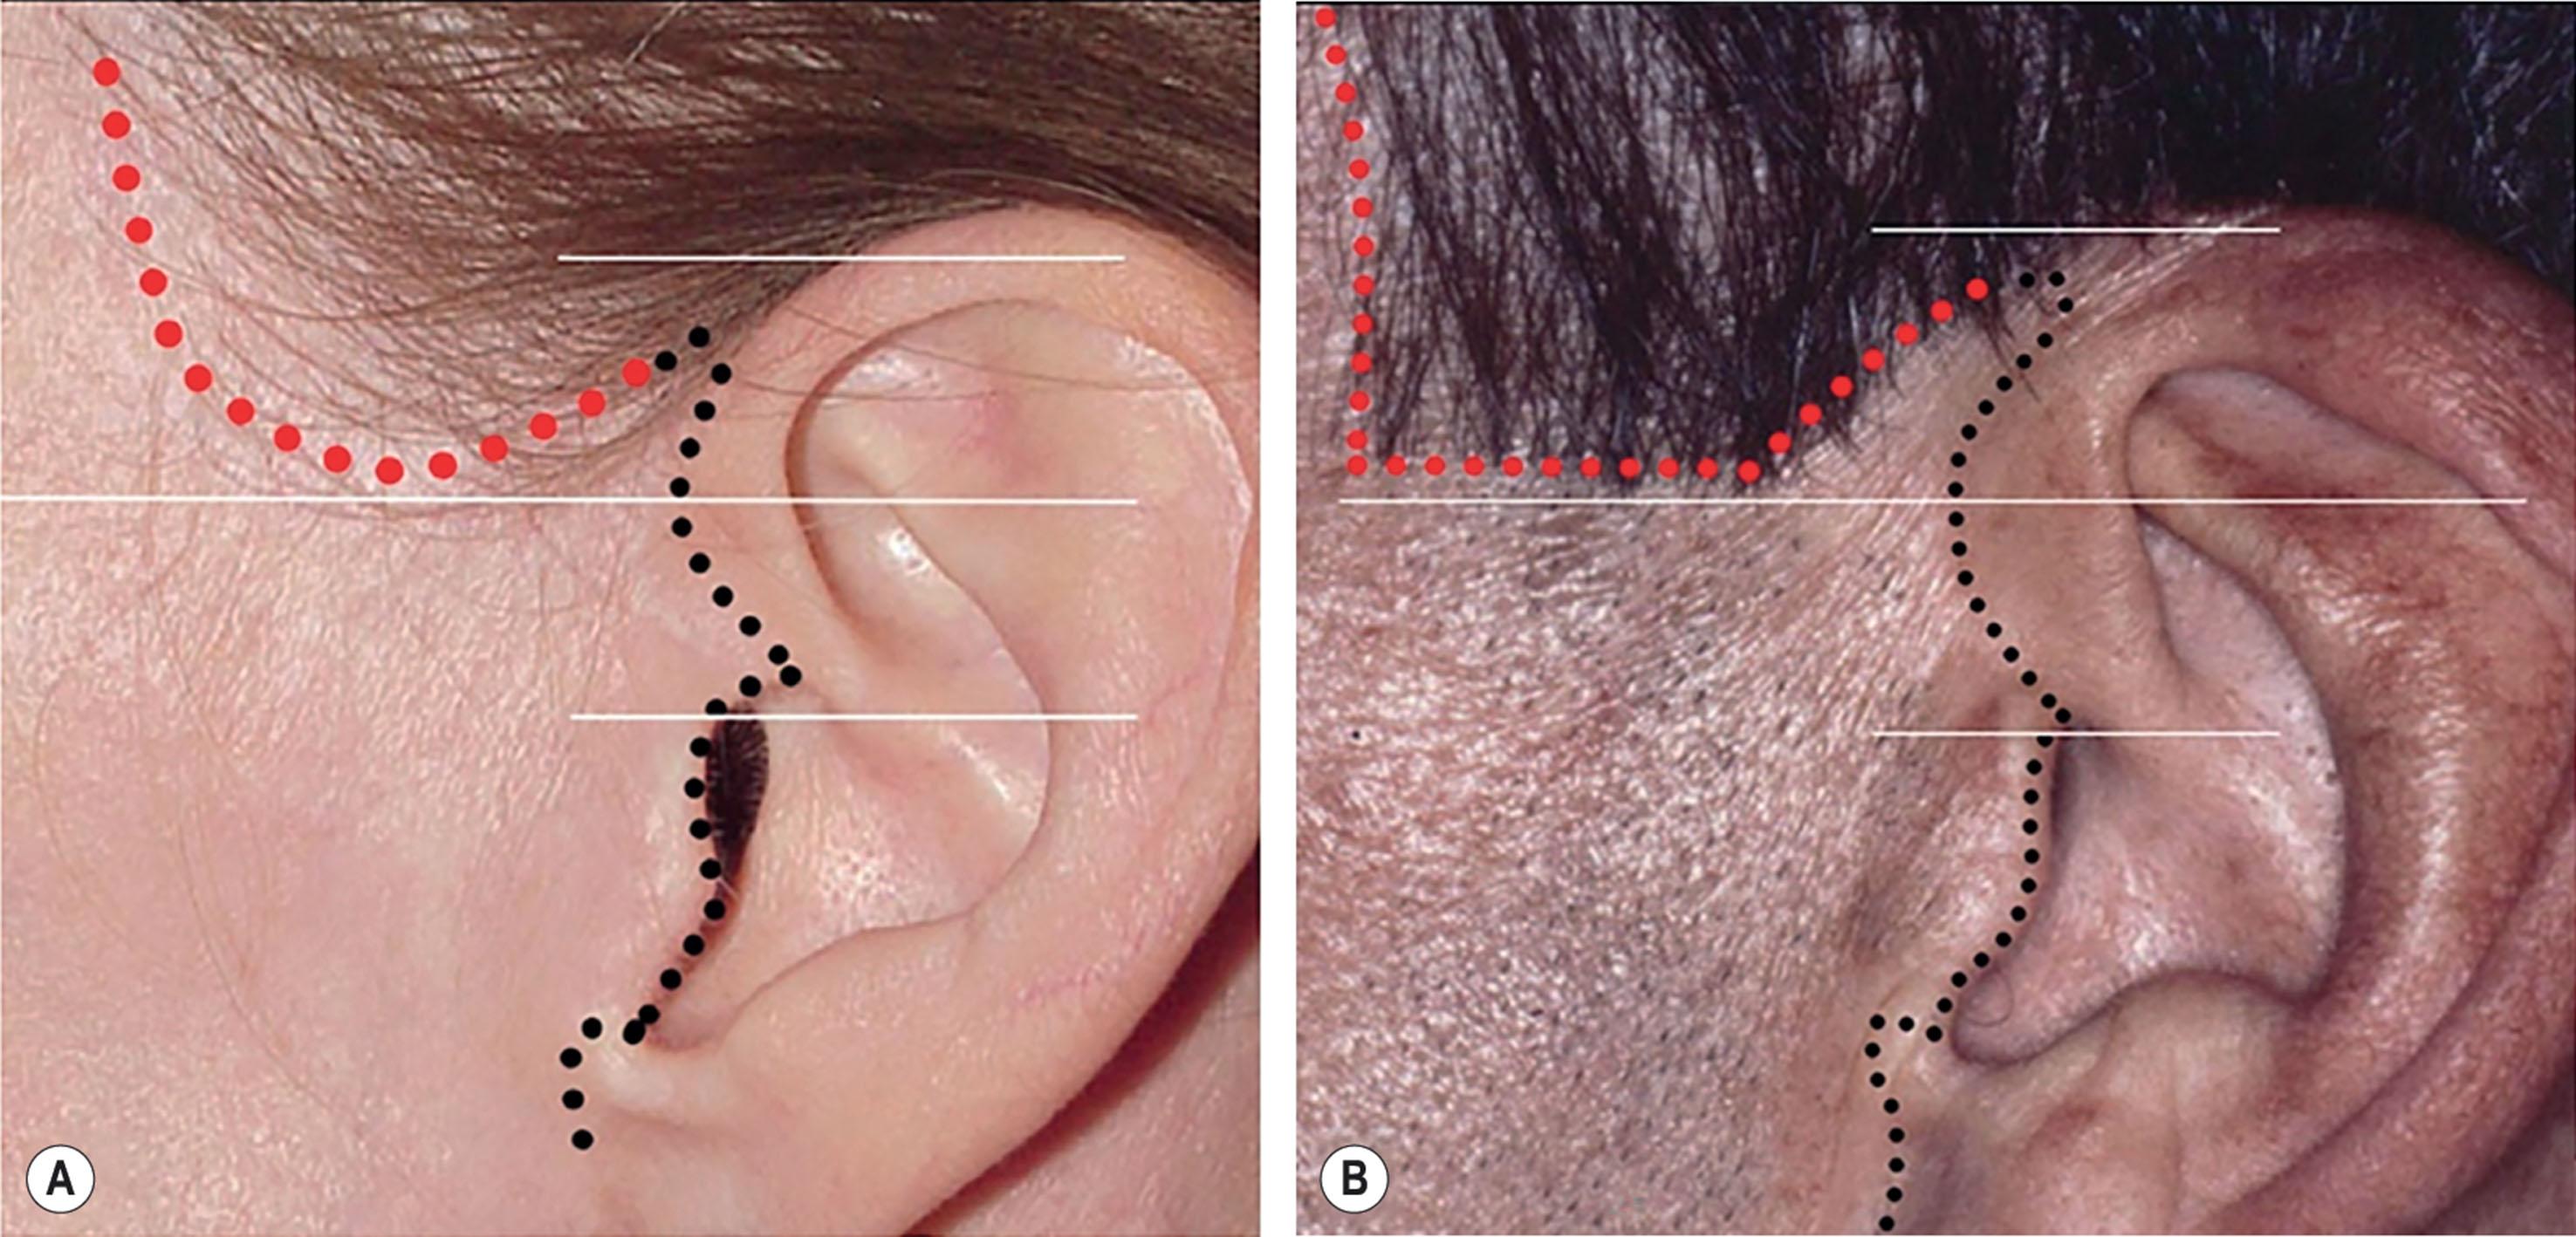 Figure 9.12.4, (A,B) Plan for incision along the temporal hairline. An incision along the temporal hairline should be considered whenever objectionable displacement of the sideburn and temple hair is predicted. Although a fine scar is present in these patients, it is not evident upon casual inspection (see Fig. 9.12.5 ). For a female patient the incision is planned as a soft curve approximately as shown in (A) . For a man, the incision is planned in a more rectangular masculine shape to preserve a full, youthful-appearing sideburn 23 (compare with Figs. 9.12.2 & 9.12.3 ).